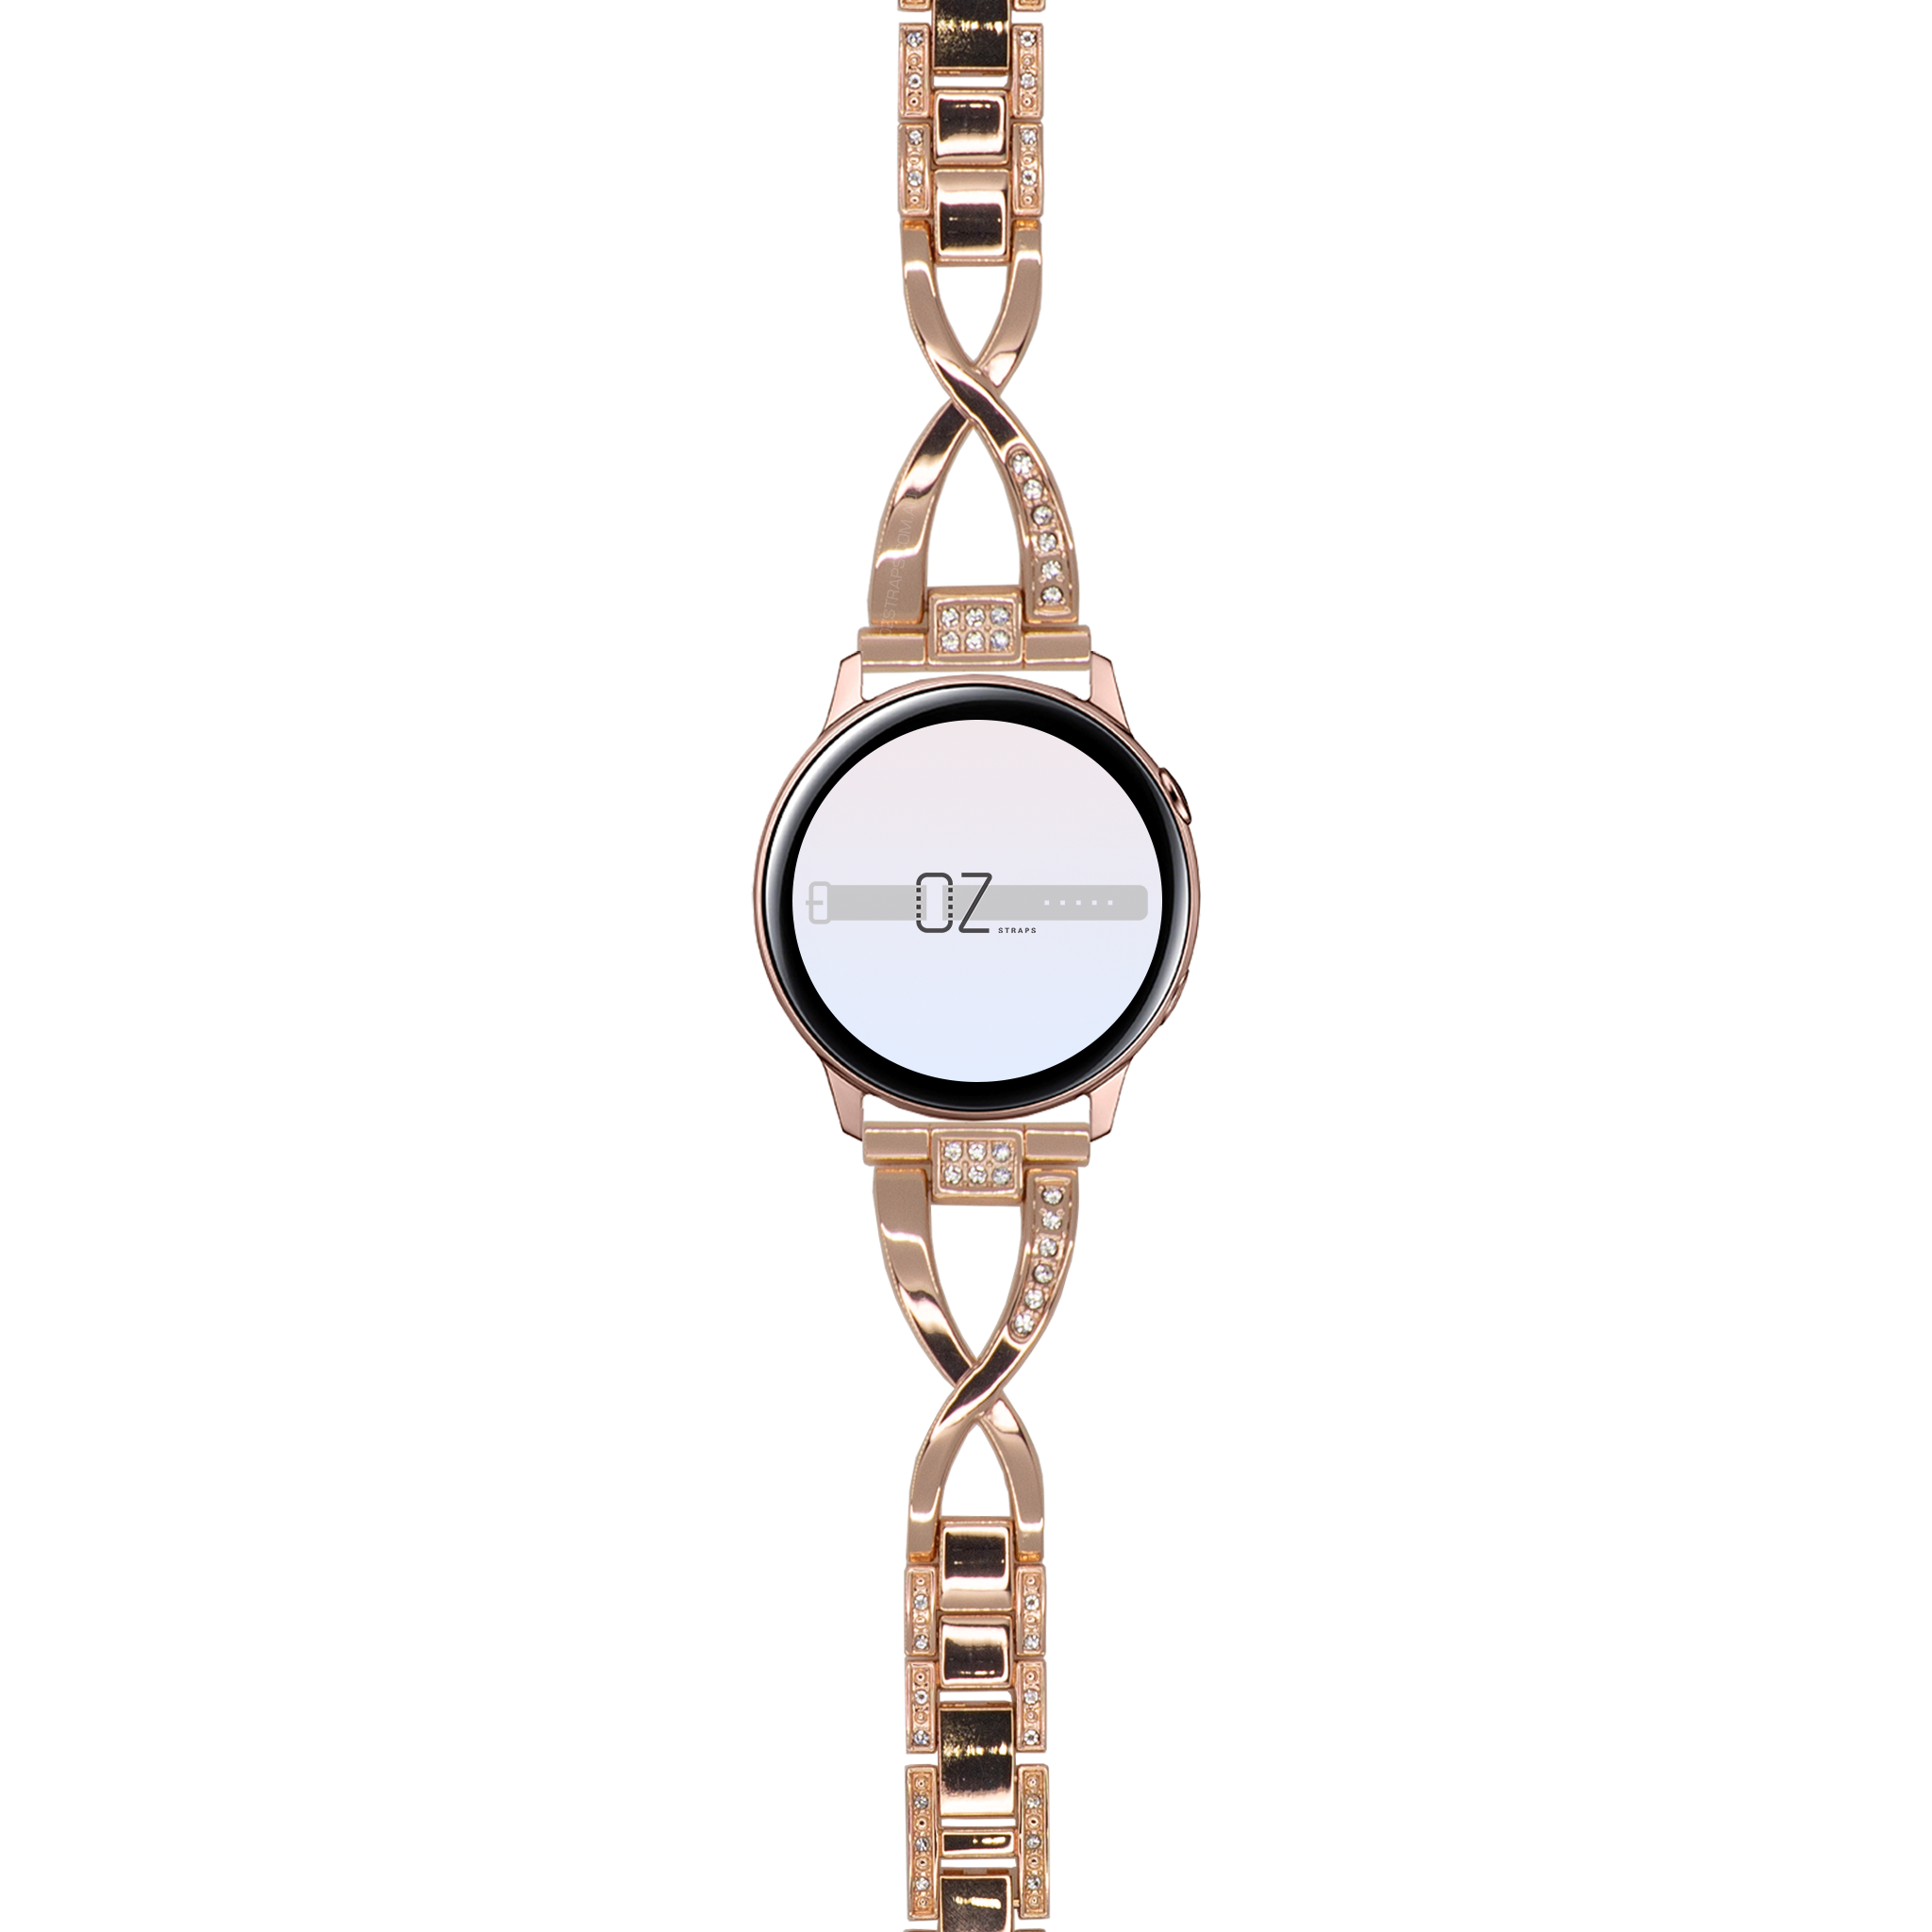 Fossil Gen 6 44mm Leather Strap With Glitter - Gold - Unisex